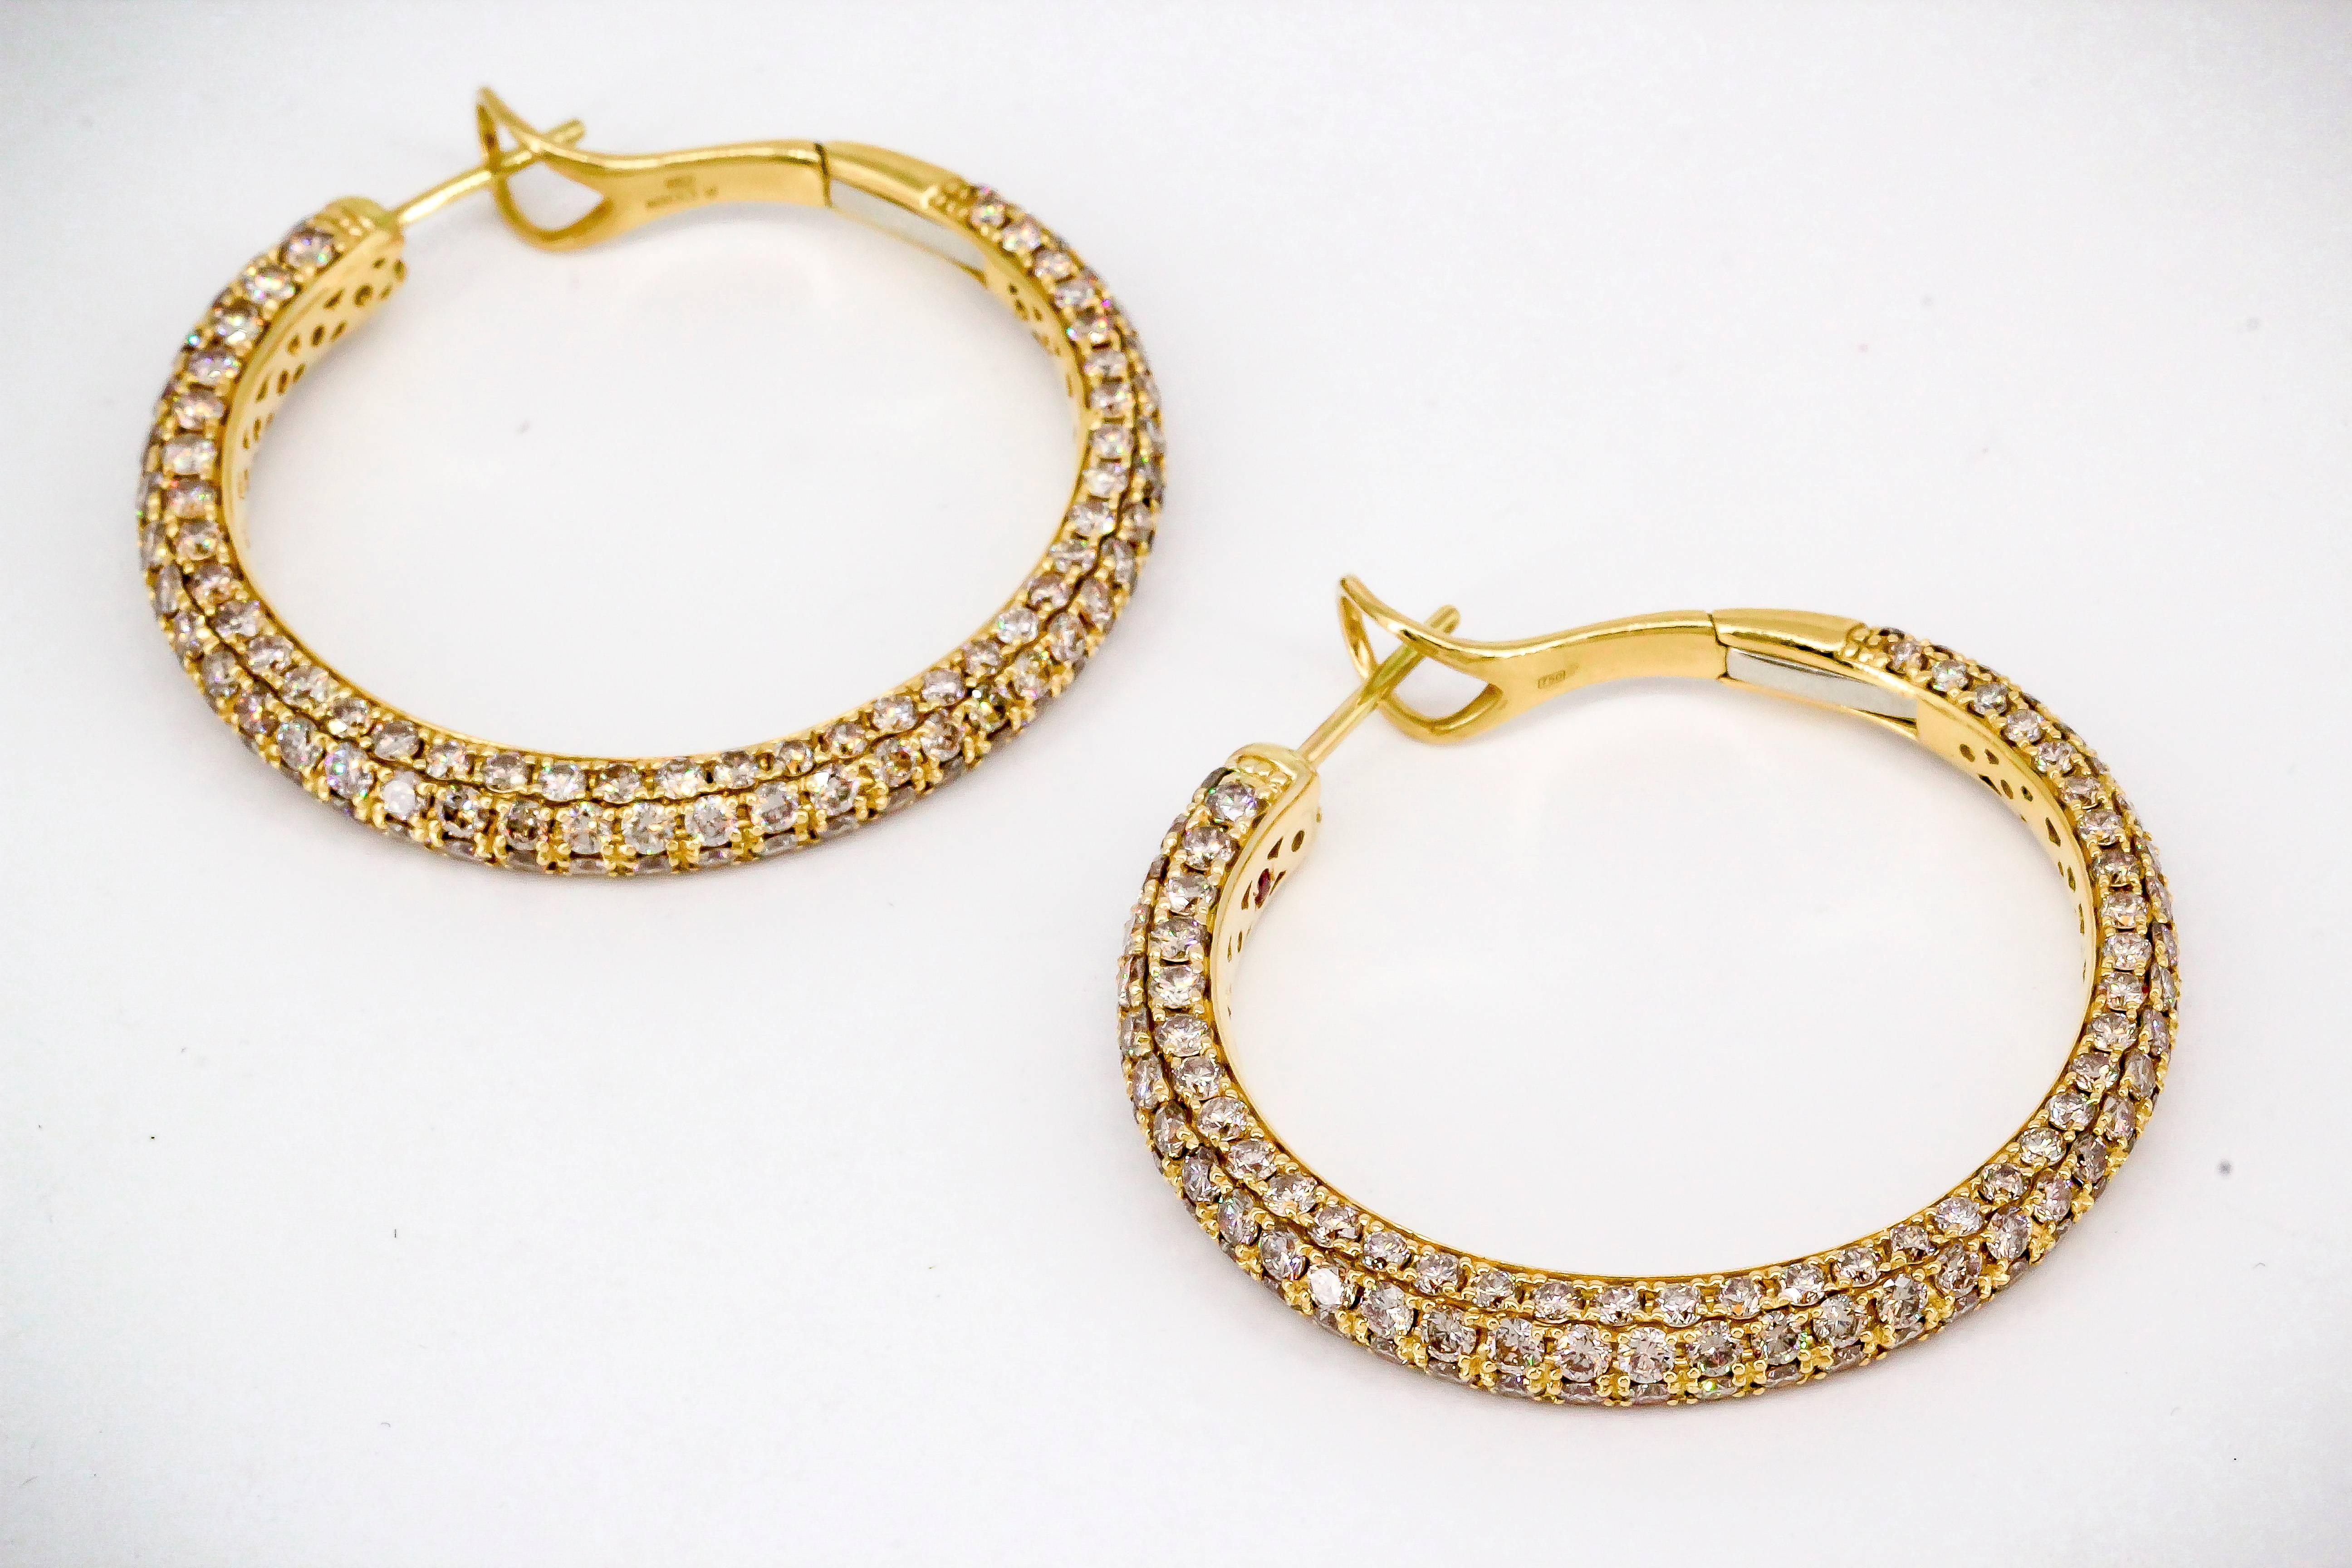 Classic diamond and 18K yellow gold hoop earrings by R. Coin. They feature high grade round brilliant cut colored and white diamonds throughout, approx 9-10 carats total weight.  Diameter approx. 1.5 inch. 

Hallmarks: R. Coin, 750.